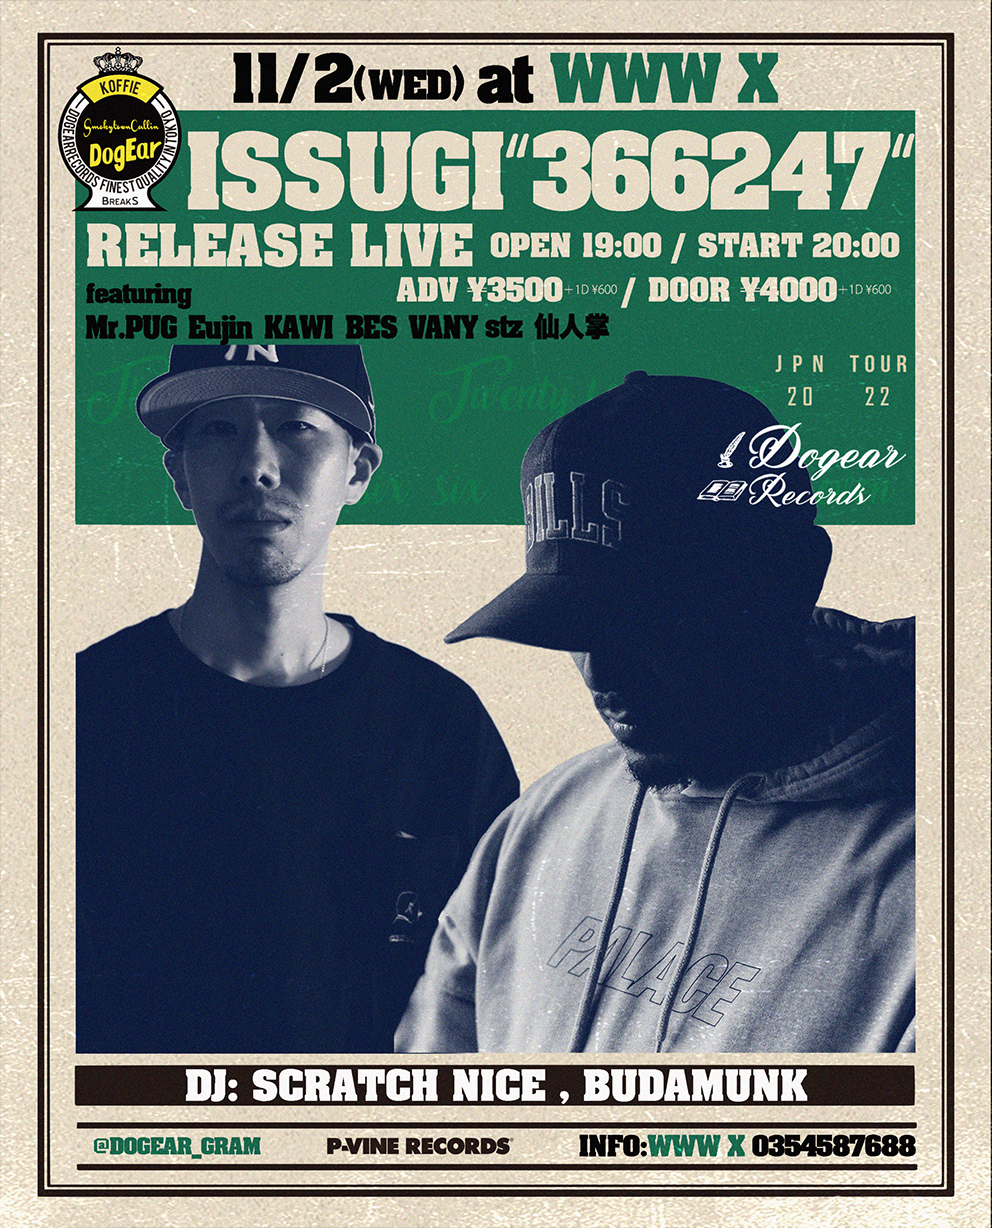 DOGEAR RECORDS PRESENTS ISSUGI「366247」RELEASE LIVE @ WWW X